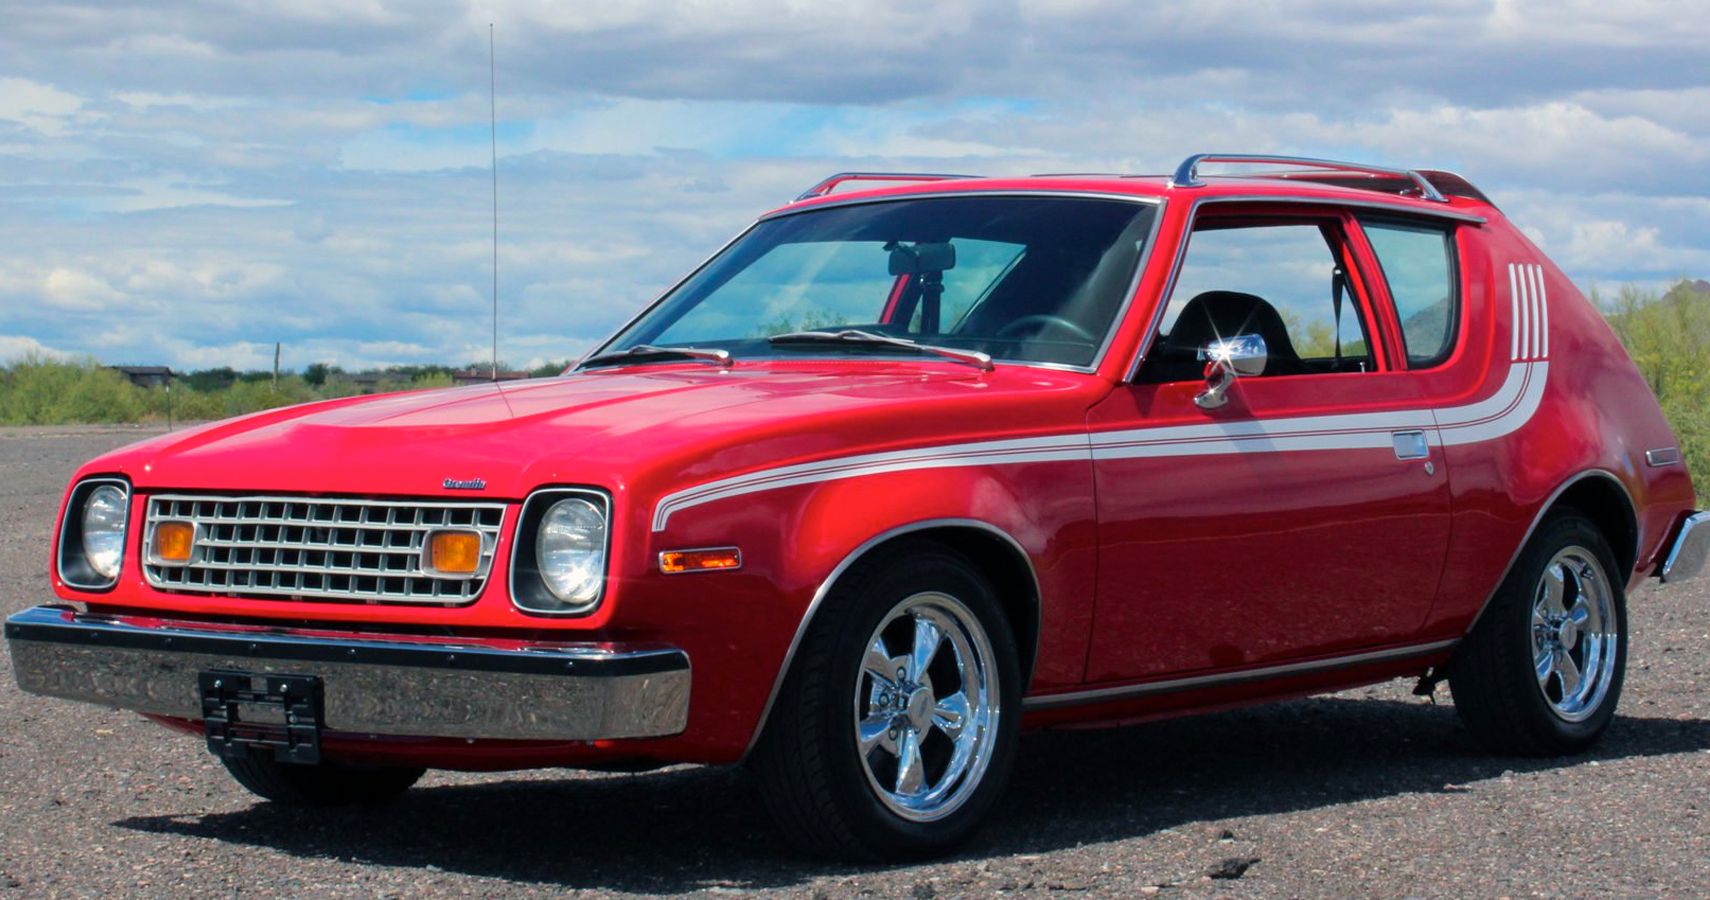 AMC Gremlin: A Look Back At One Of America's Strangest Cars